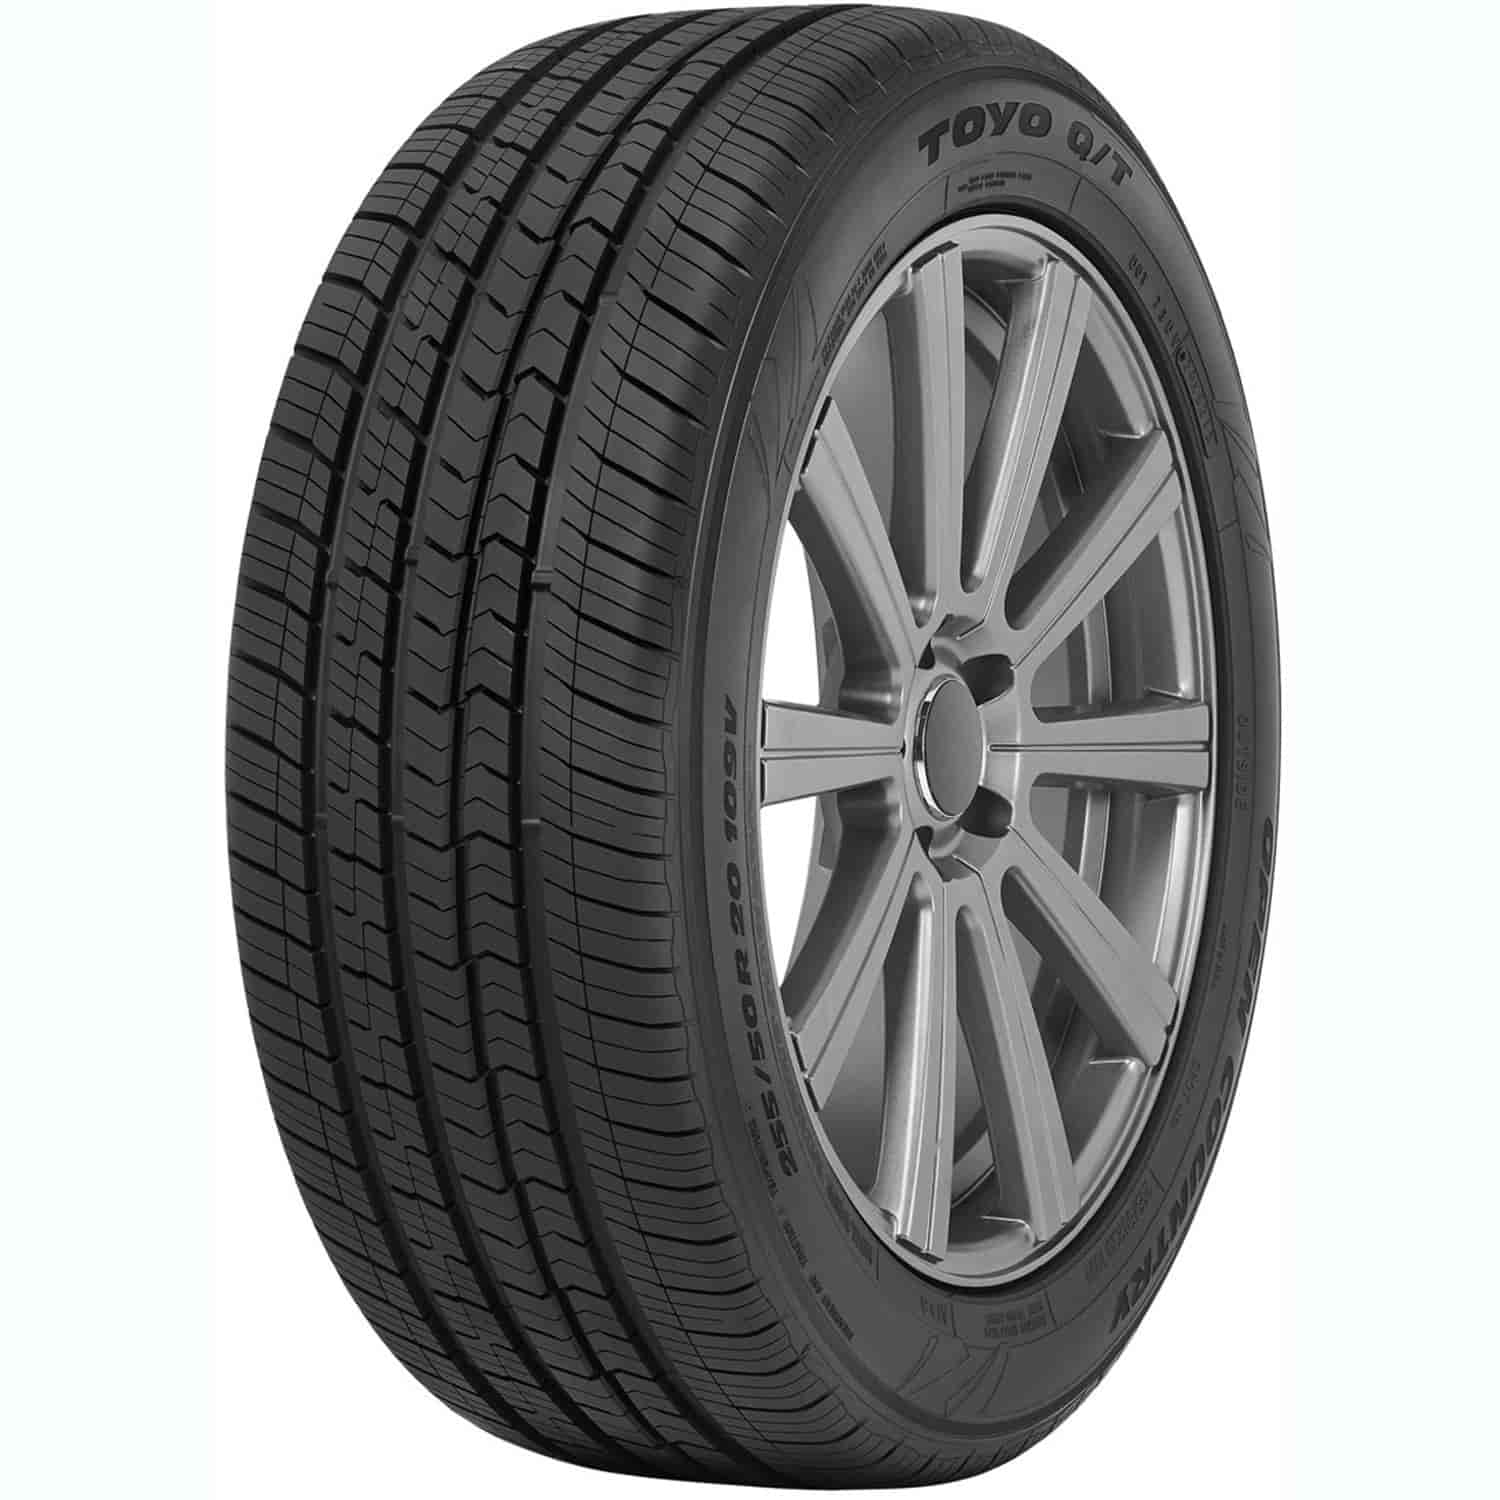 OPEN COUNTRY Q/T 255/50R20 109V XL